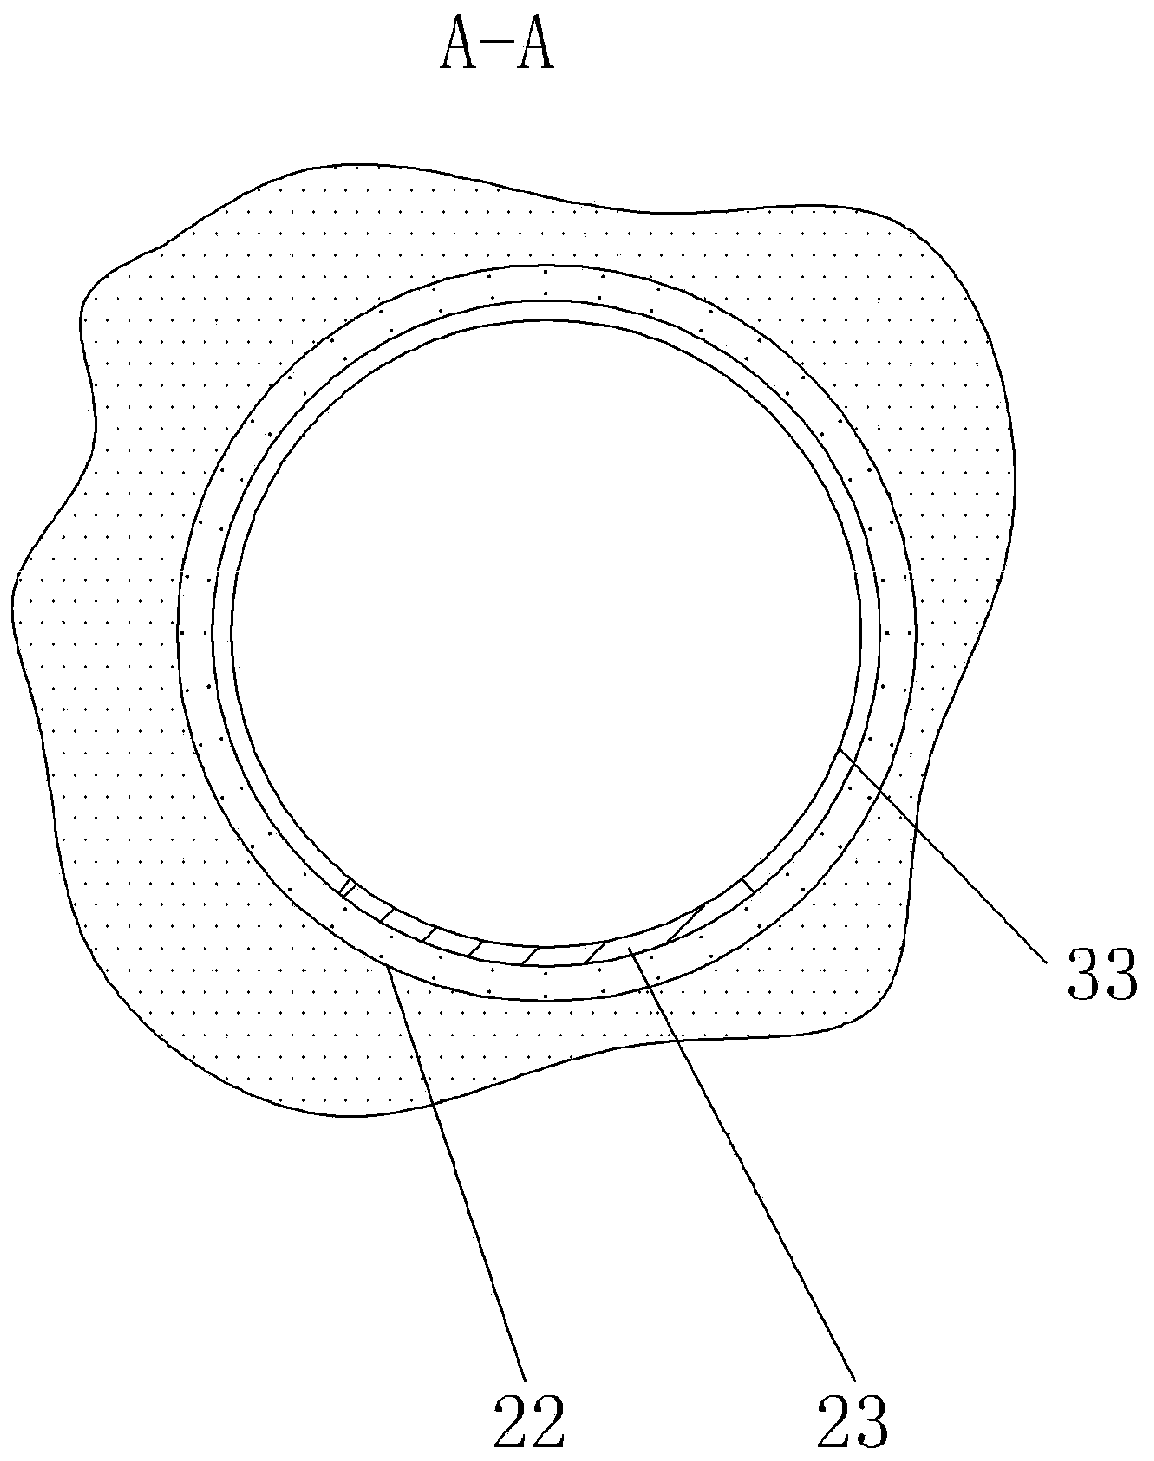 Propelling method for combined portion between shield tunnel segment and mine tunnel segment in subway tunnel